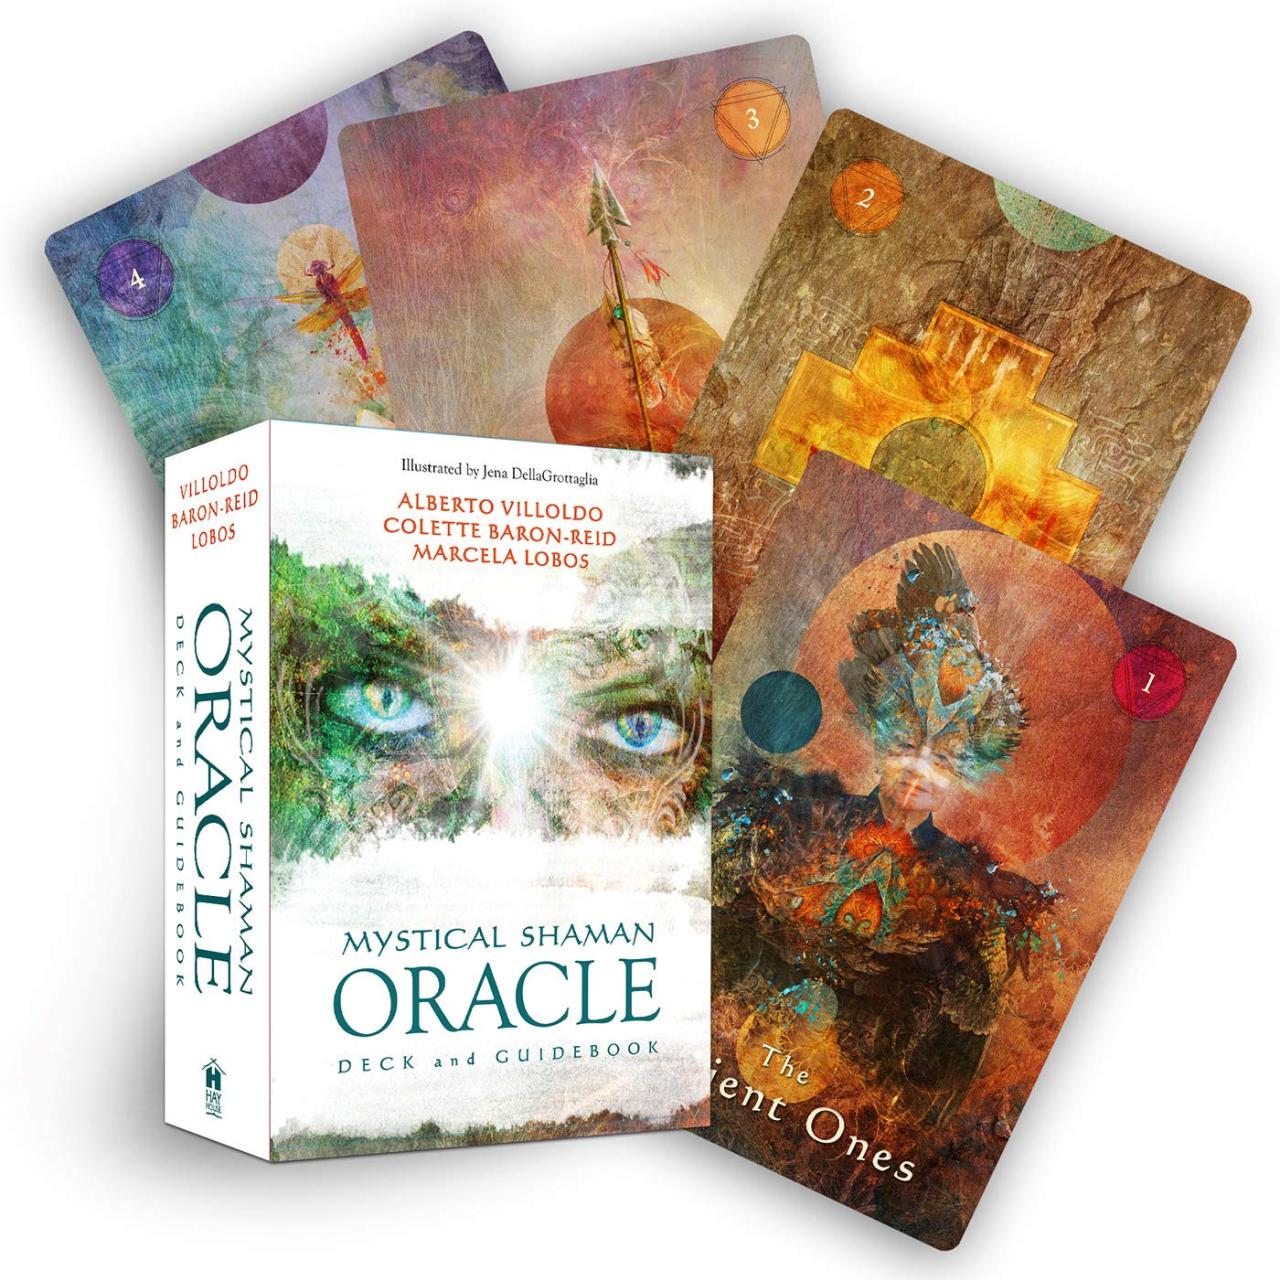 Mystic Prophecies: The Oracle's Call
